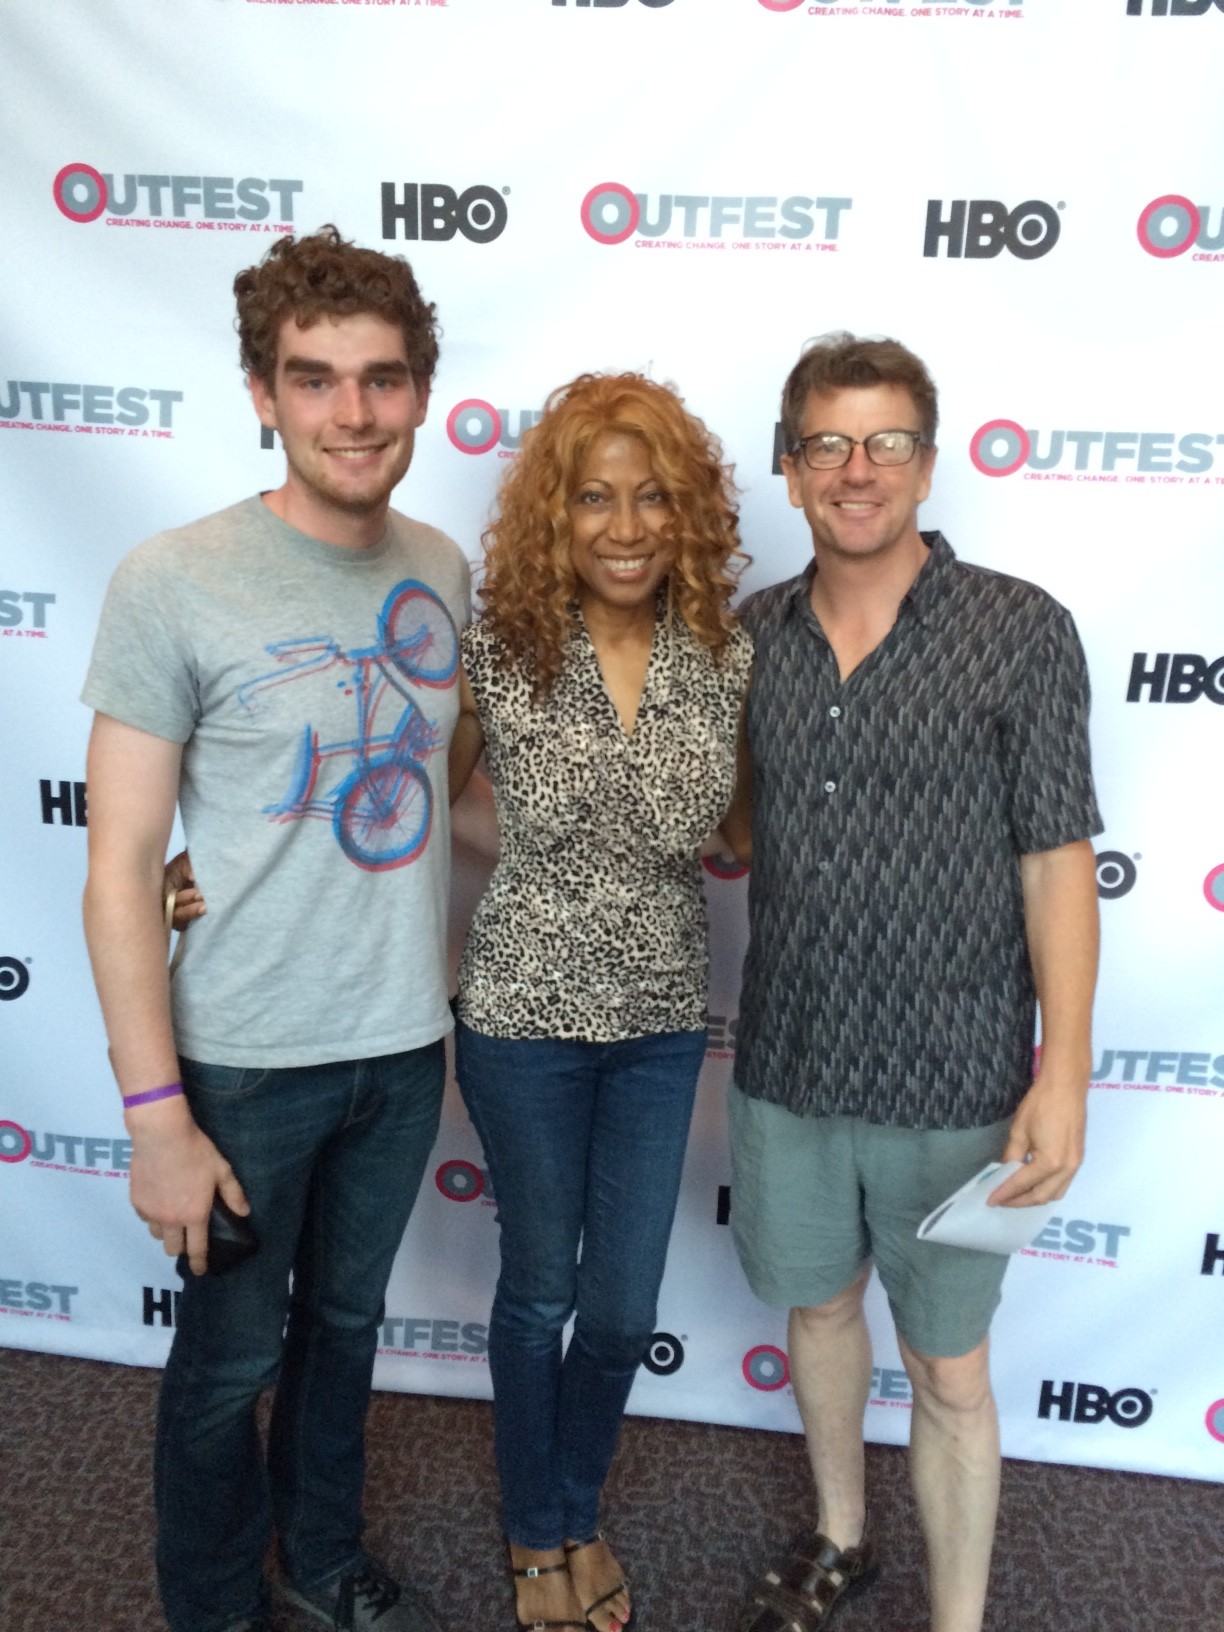 Devin Uhlman, Gwendolyn Oliver and Michael Uhlman at the Spare Parts Premiere at the Outfest Film Festival.